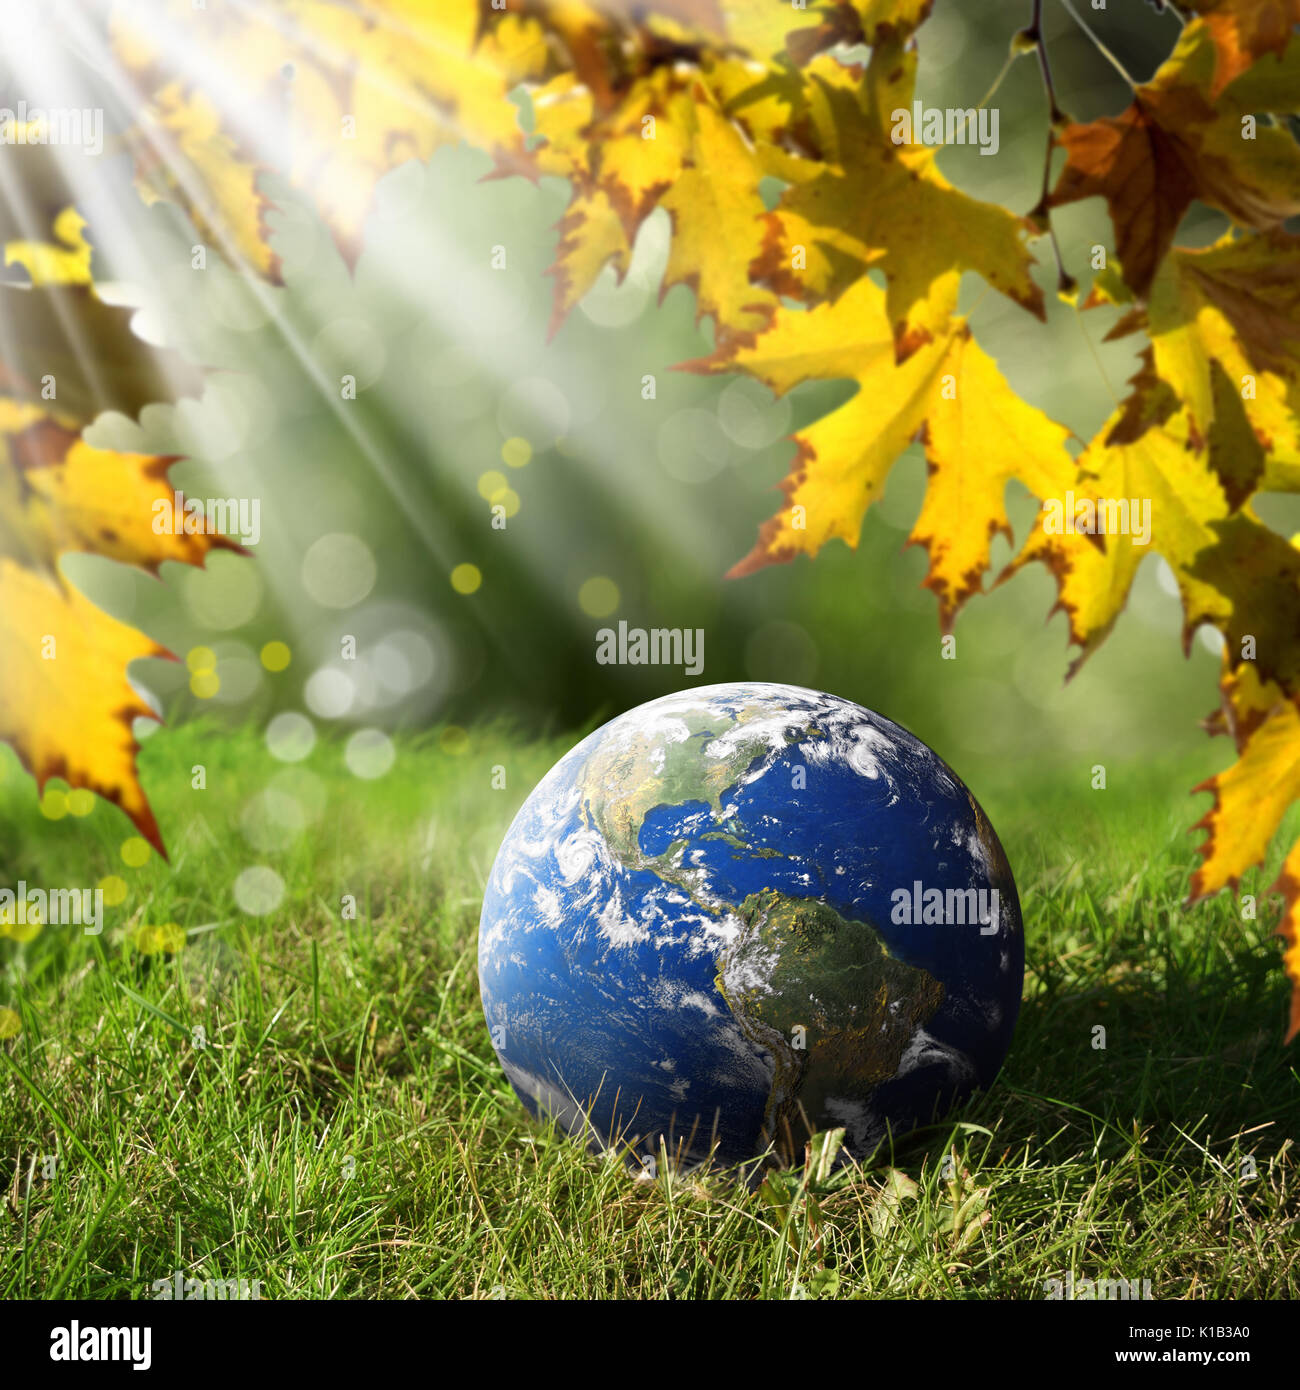 Conceptual image of globe on landscape. Elements of this image furnished by NASA. Stock Photo